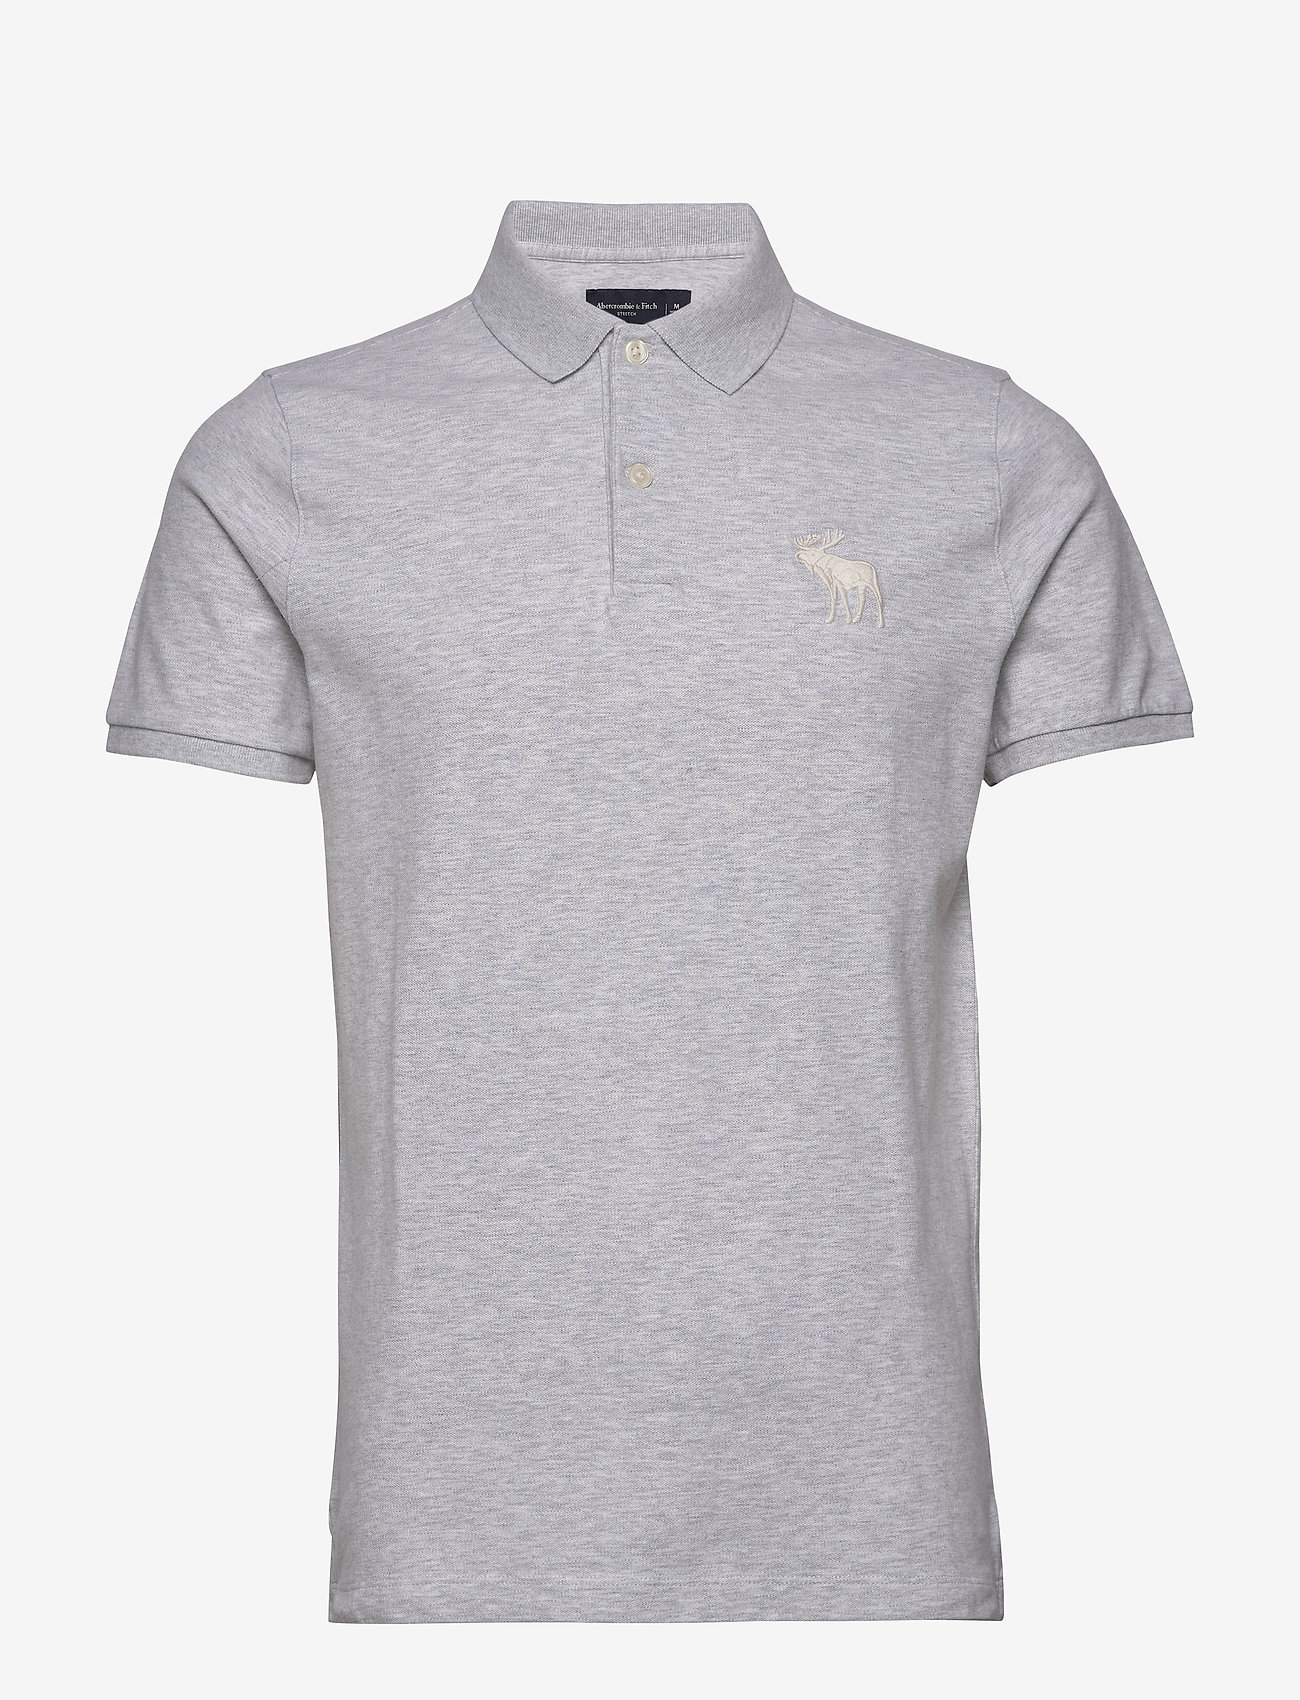 abercrombie and fitch polo shirts